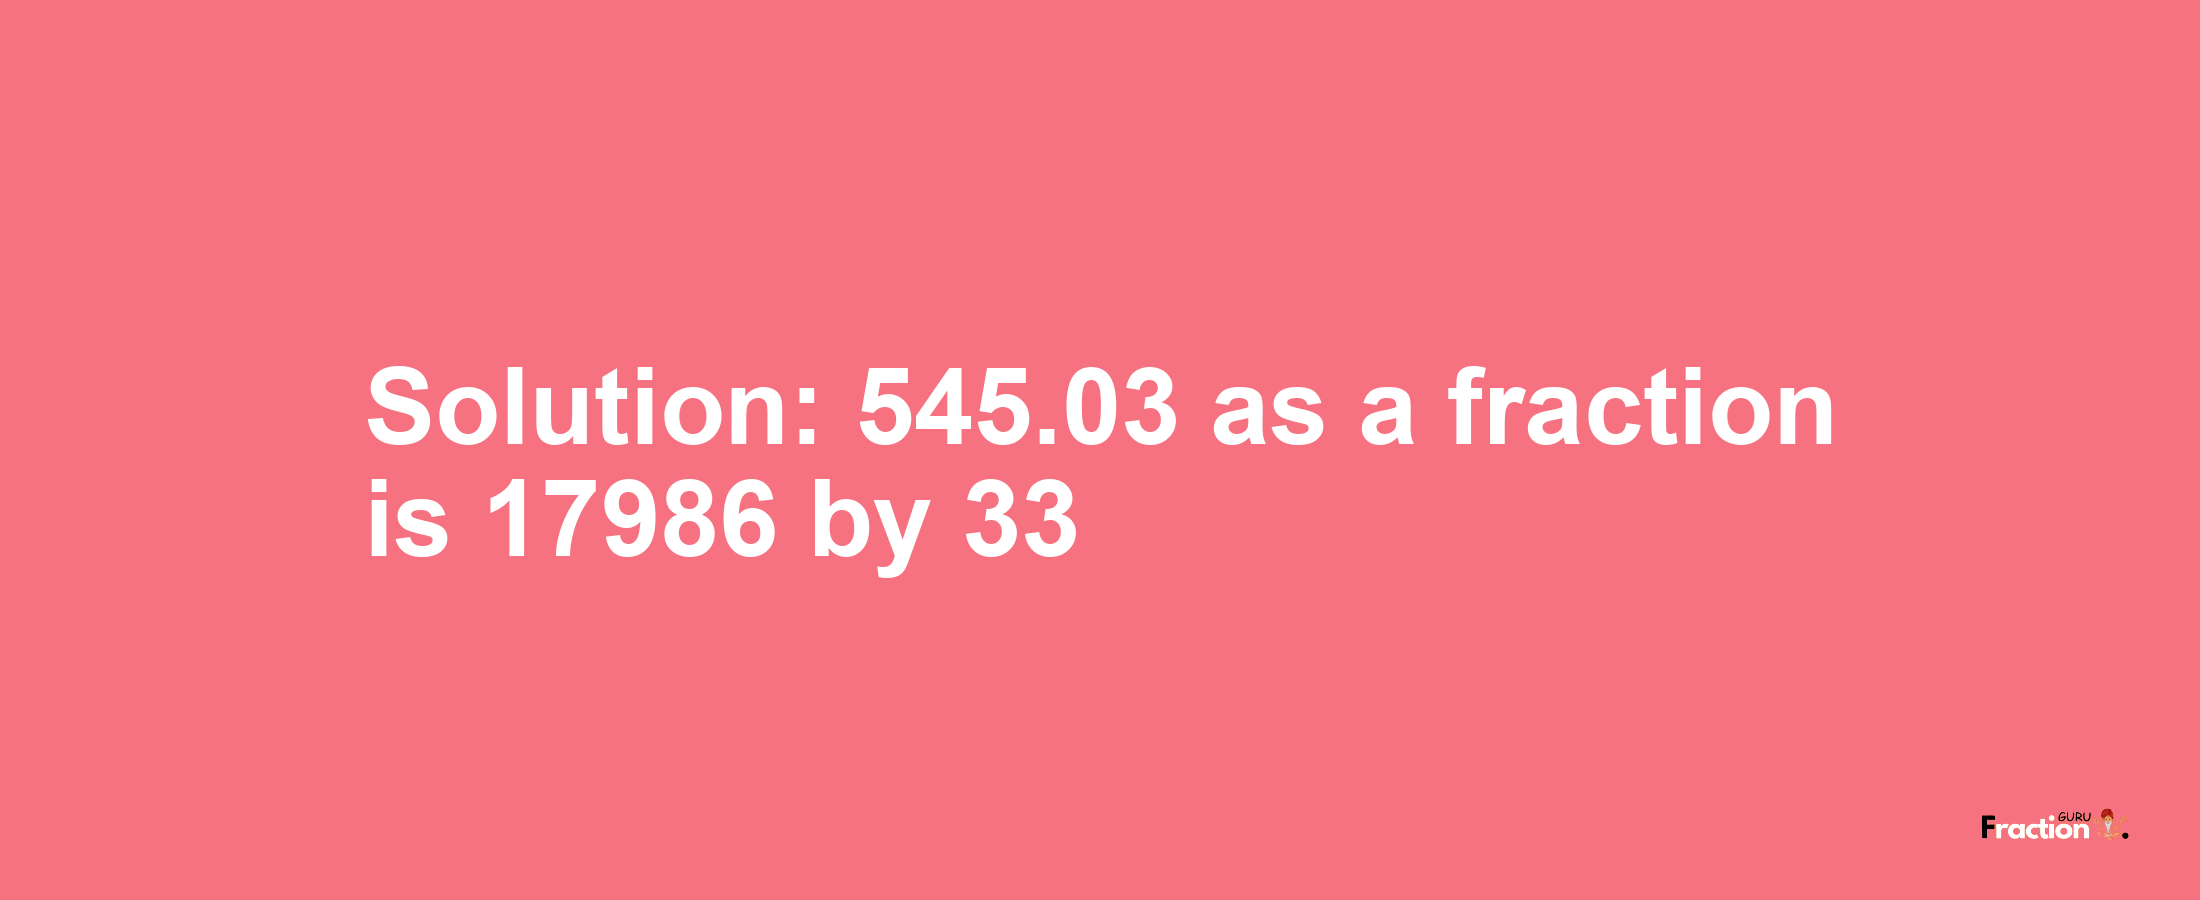 Solution:545.03 as a fraction is 17986/33